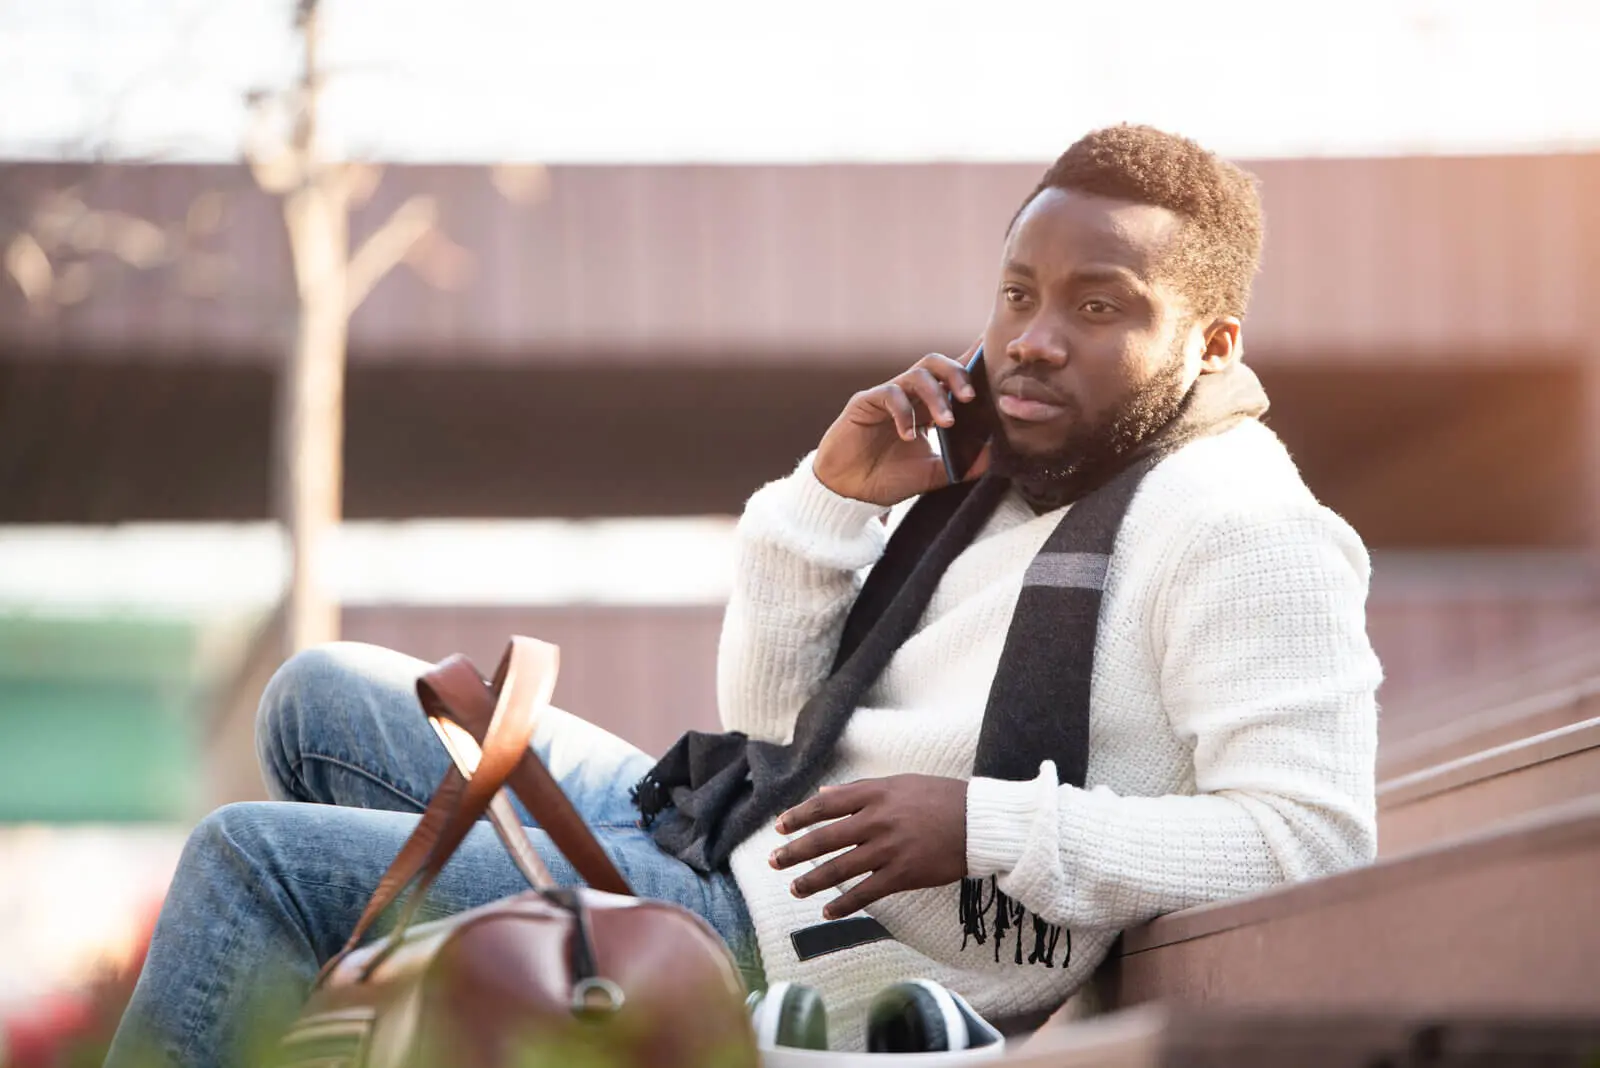 A young afro-american student sitting on a bench talking on his cellphone.